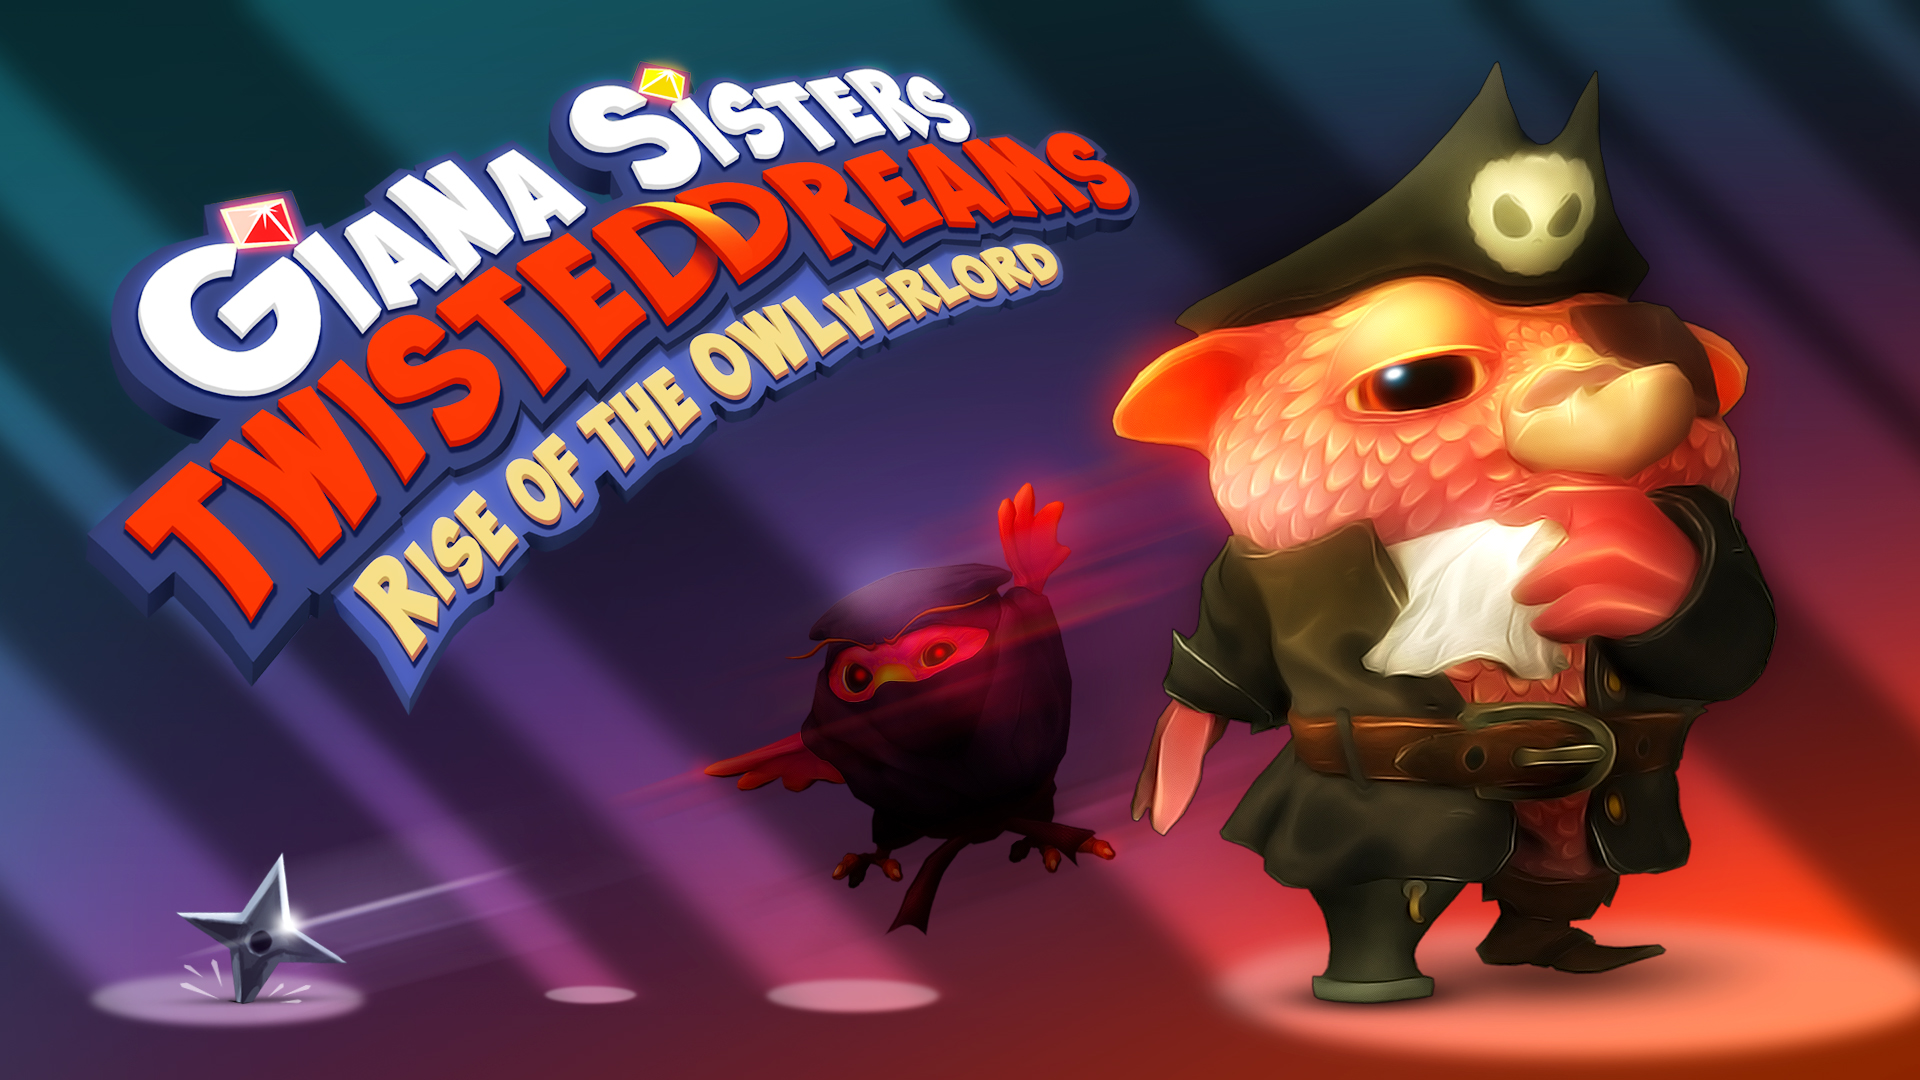 Giana Sisters: Twisted Dreams Wallpapers